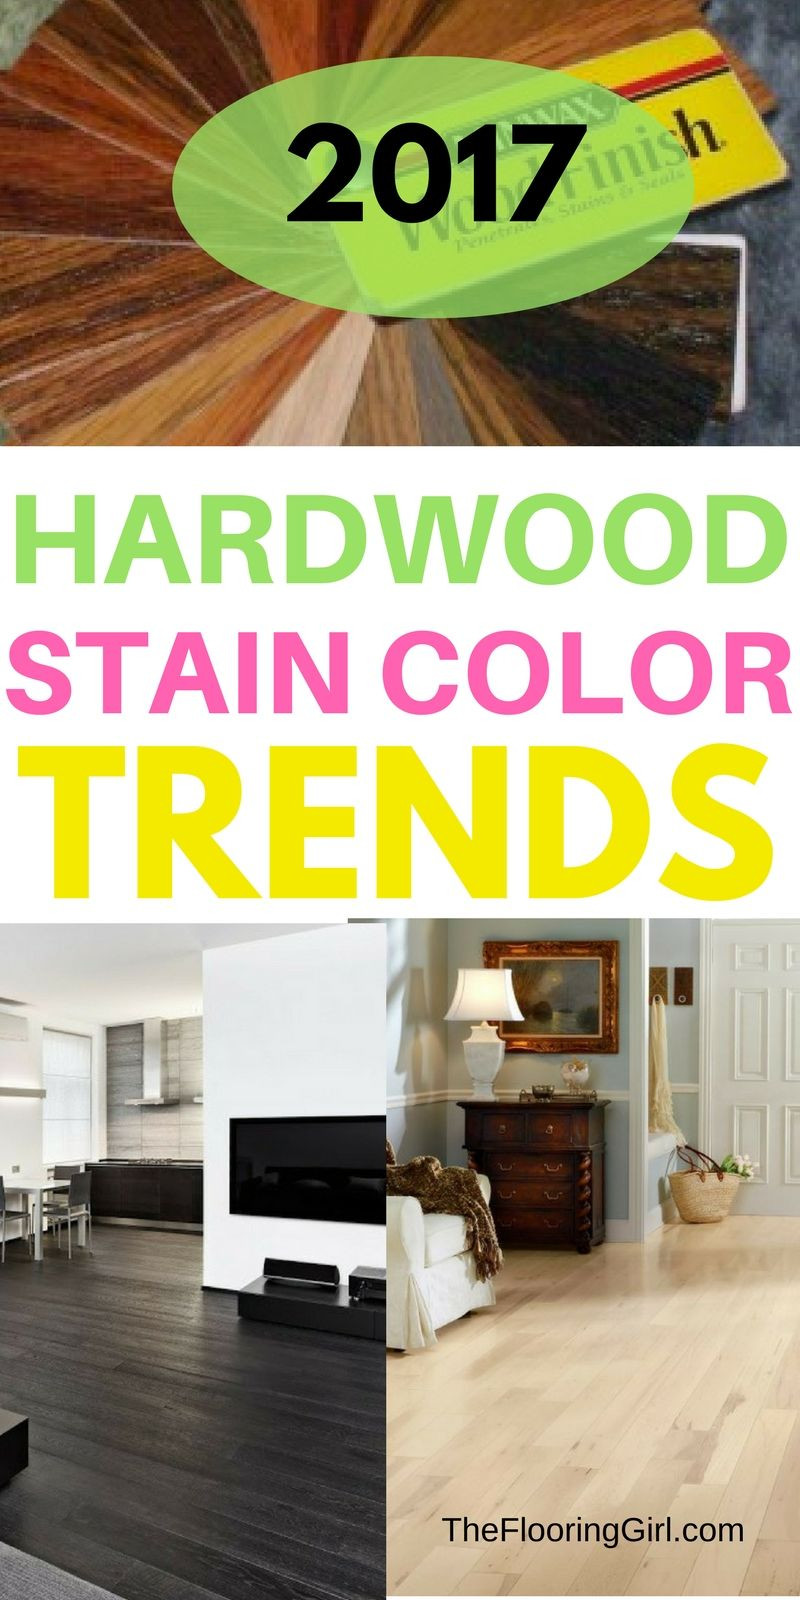 13 Great Diamond W Hardwood Flooring 2024 free download diamond w hardwood flooring of hardwood flooring stain color trends 2018 more from the flooring regarding hardwood flooring stain color trends for 2017 hardwood colors that are in style thef